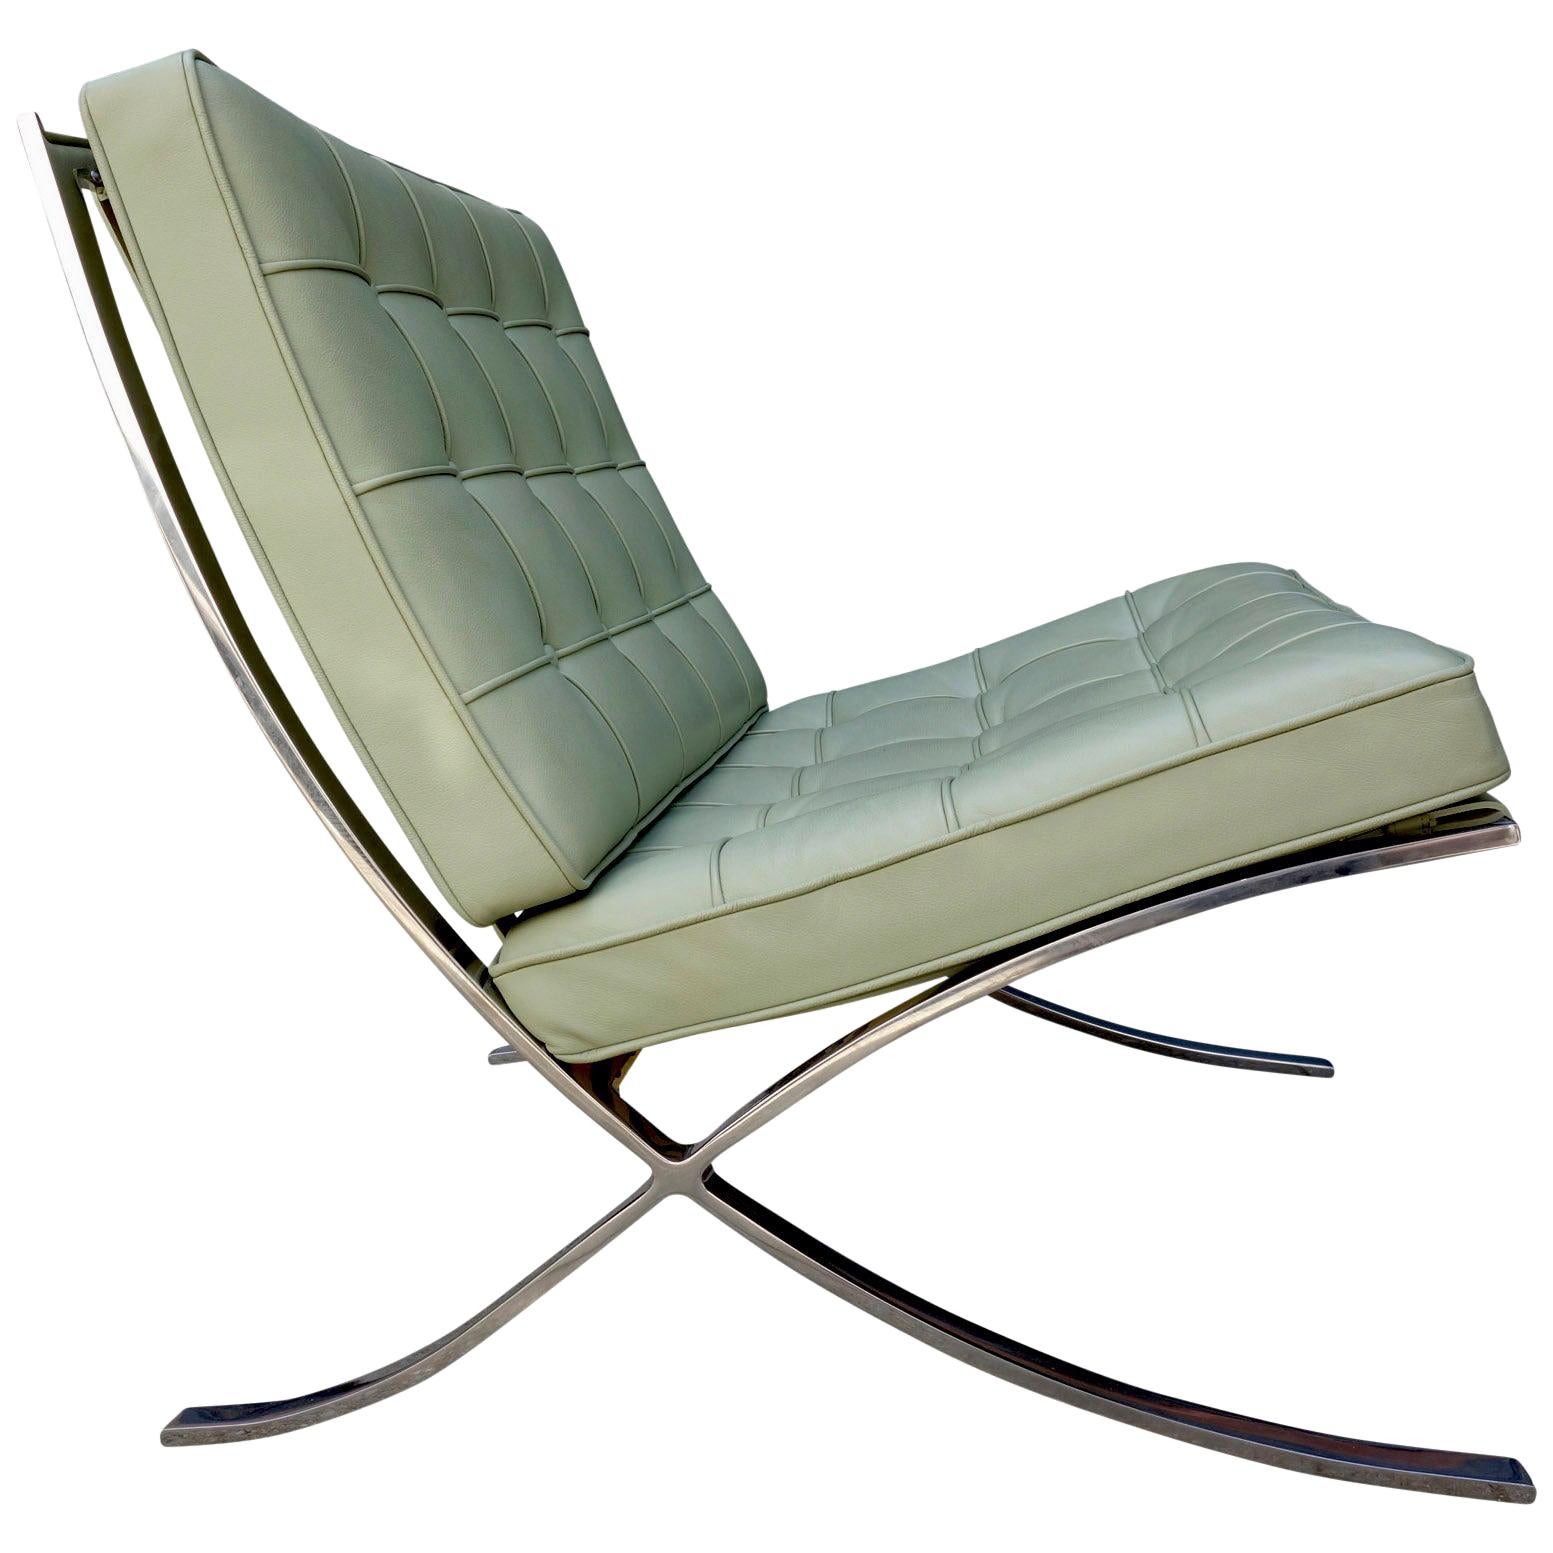 Midcentury Barcelona Chair in Special Order Stainless Steel and Leather